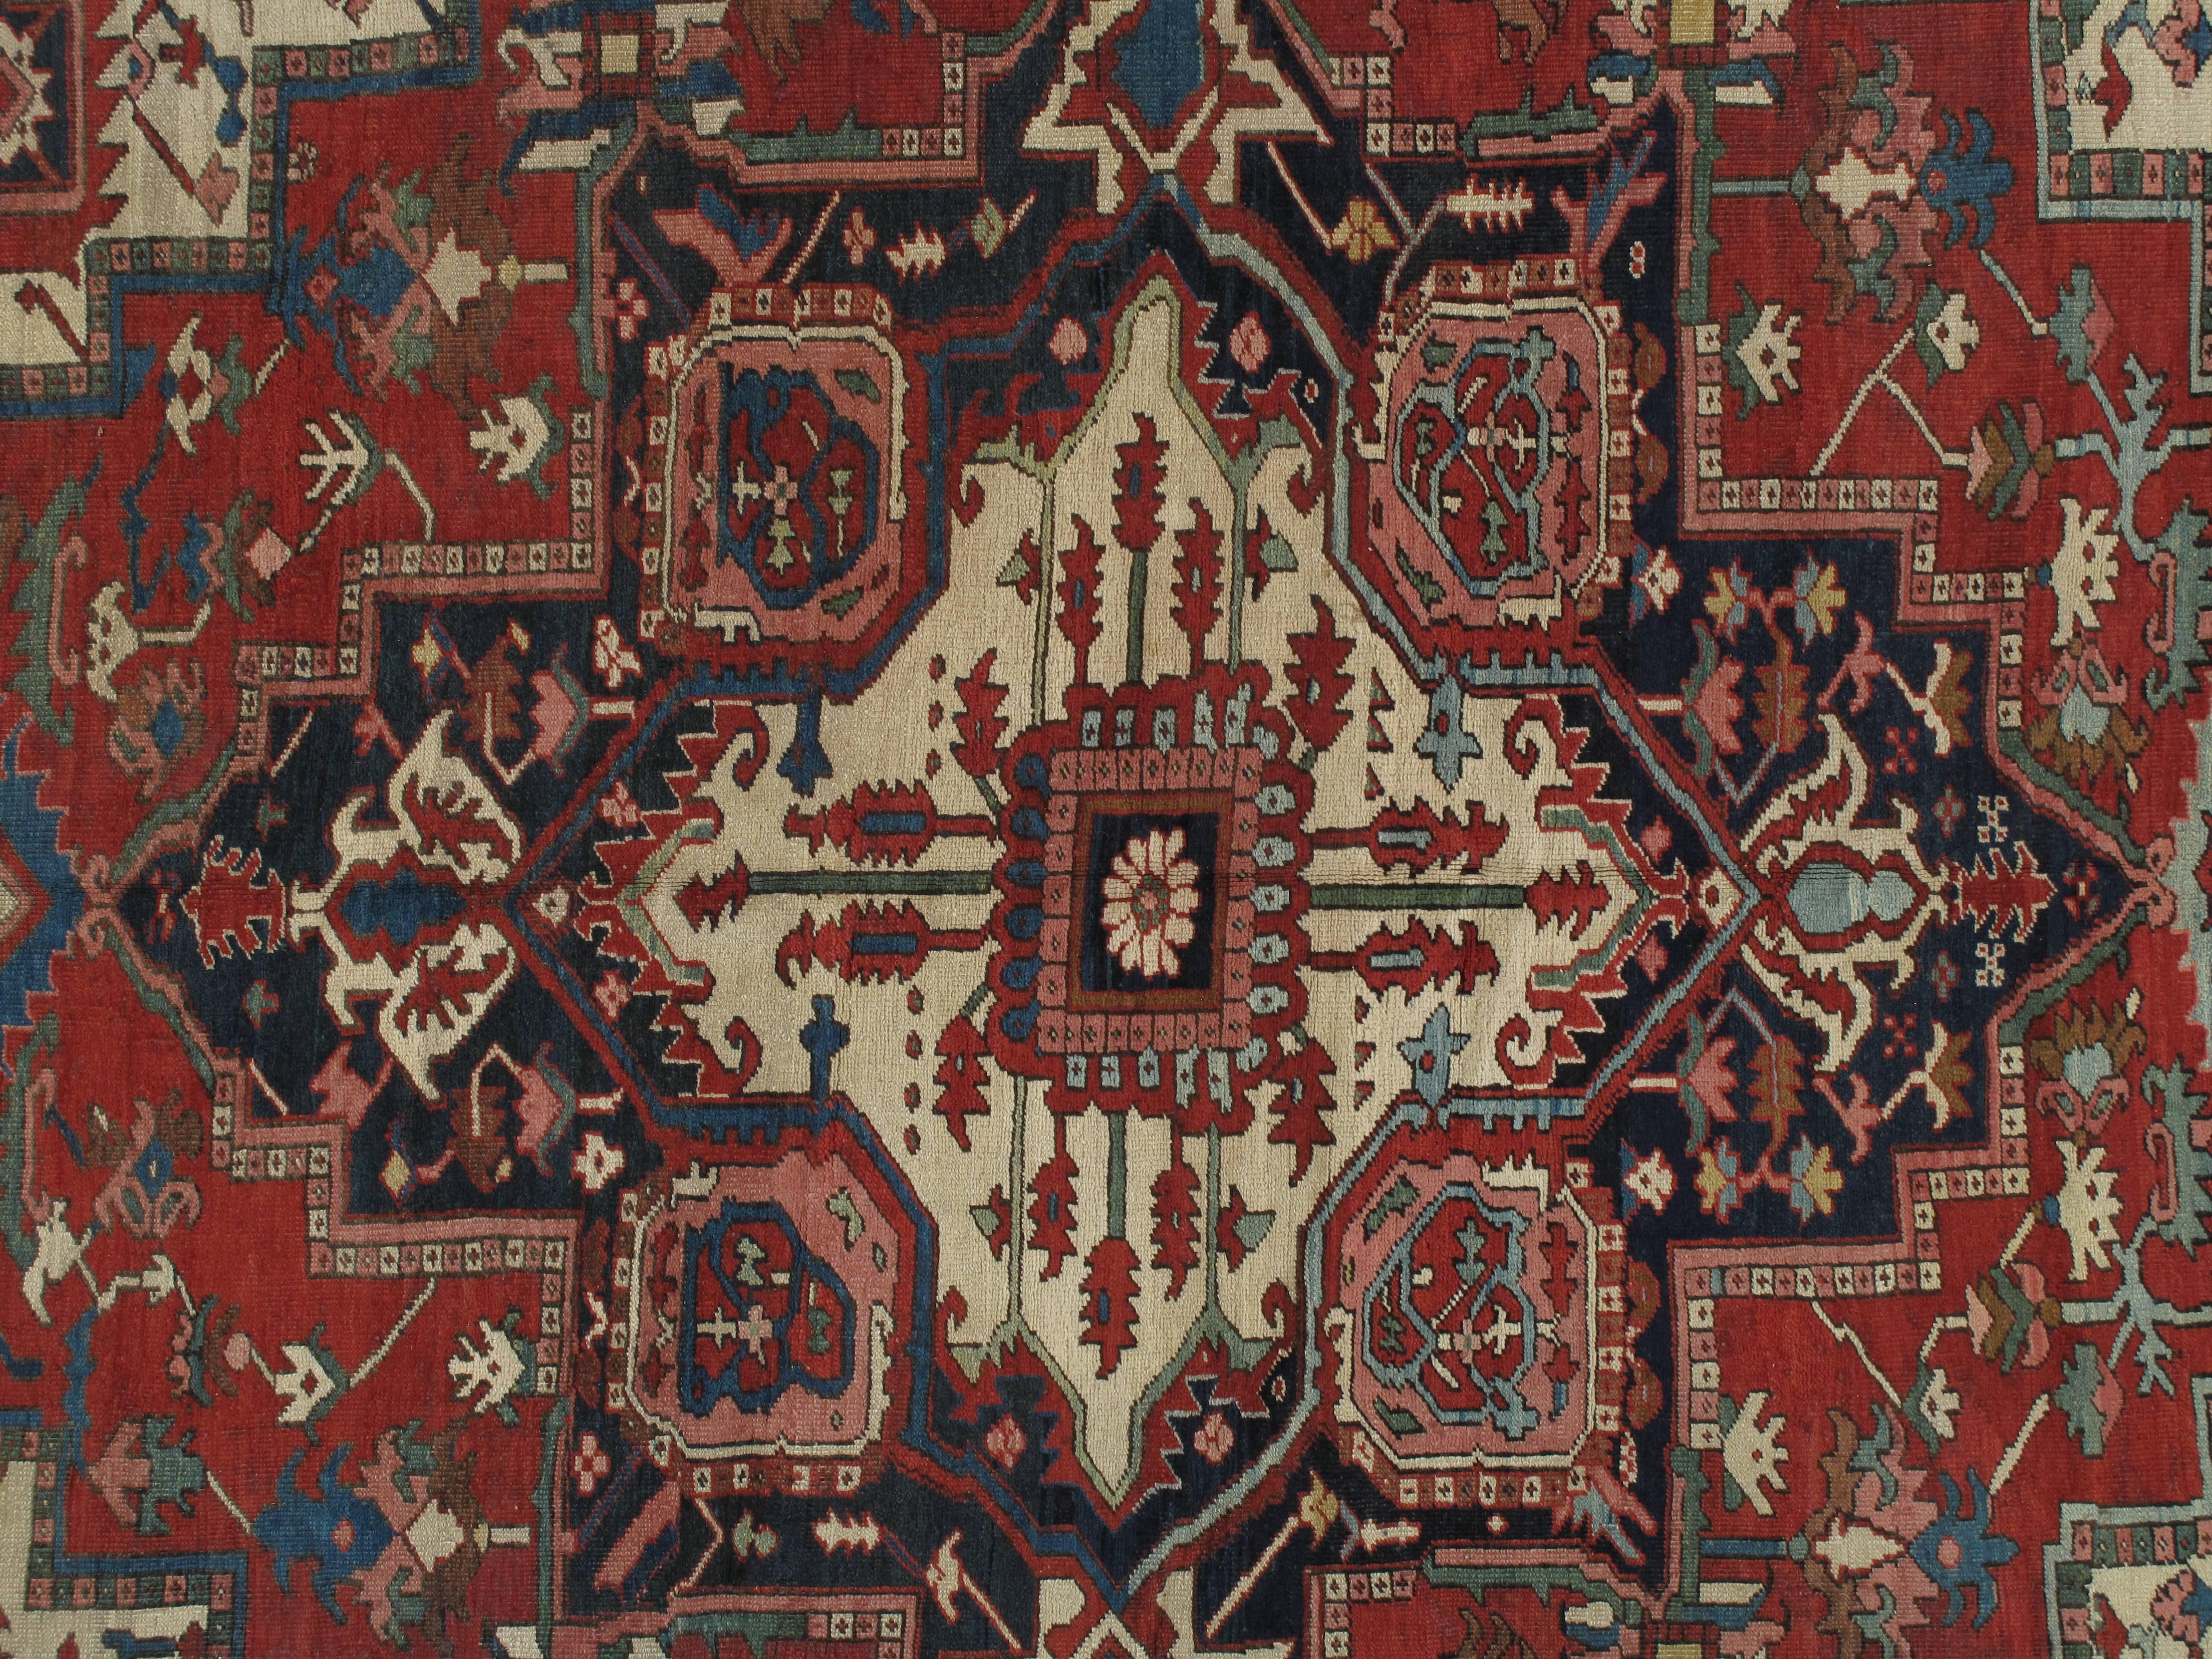 19th century Persian Serapi carpets are some of the most highly prized and sought-after antique Persian carpets in the world. They are characterized by their bold, geometric designs, vivid colors, and exceptional quality.

Serapi carpets were